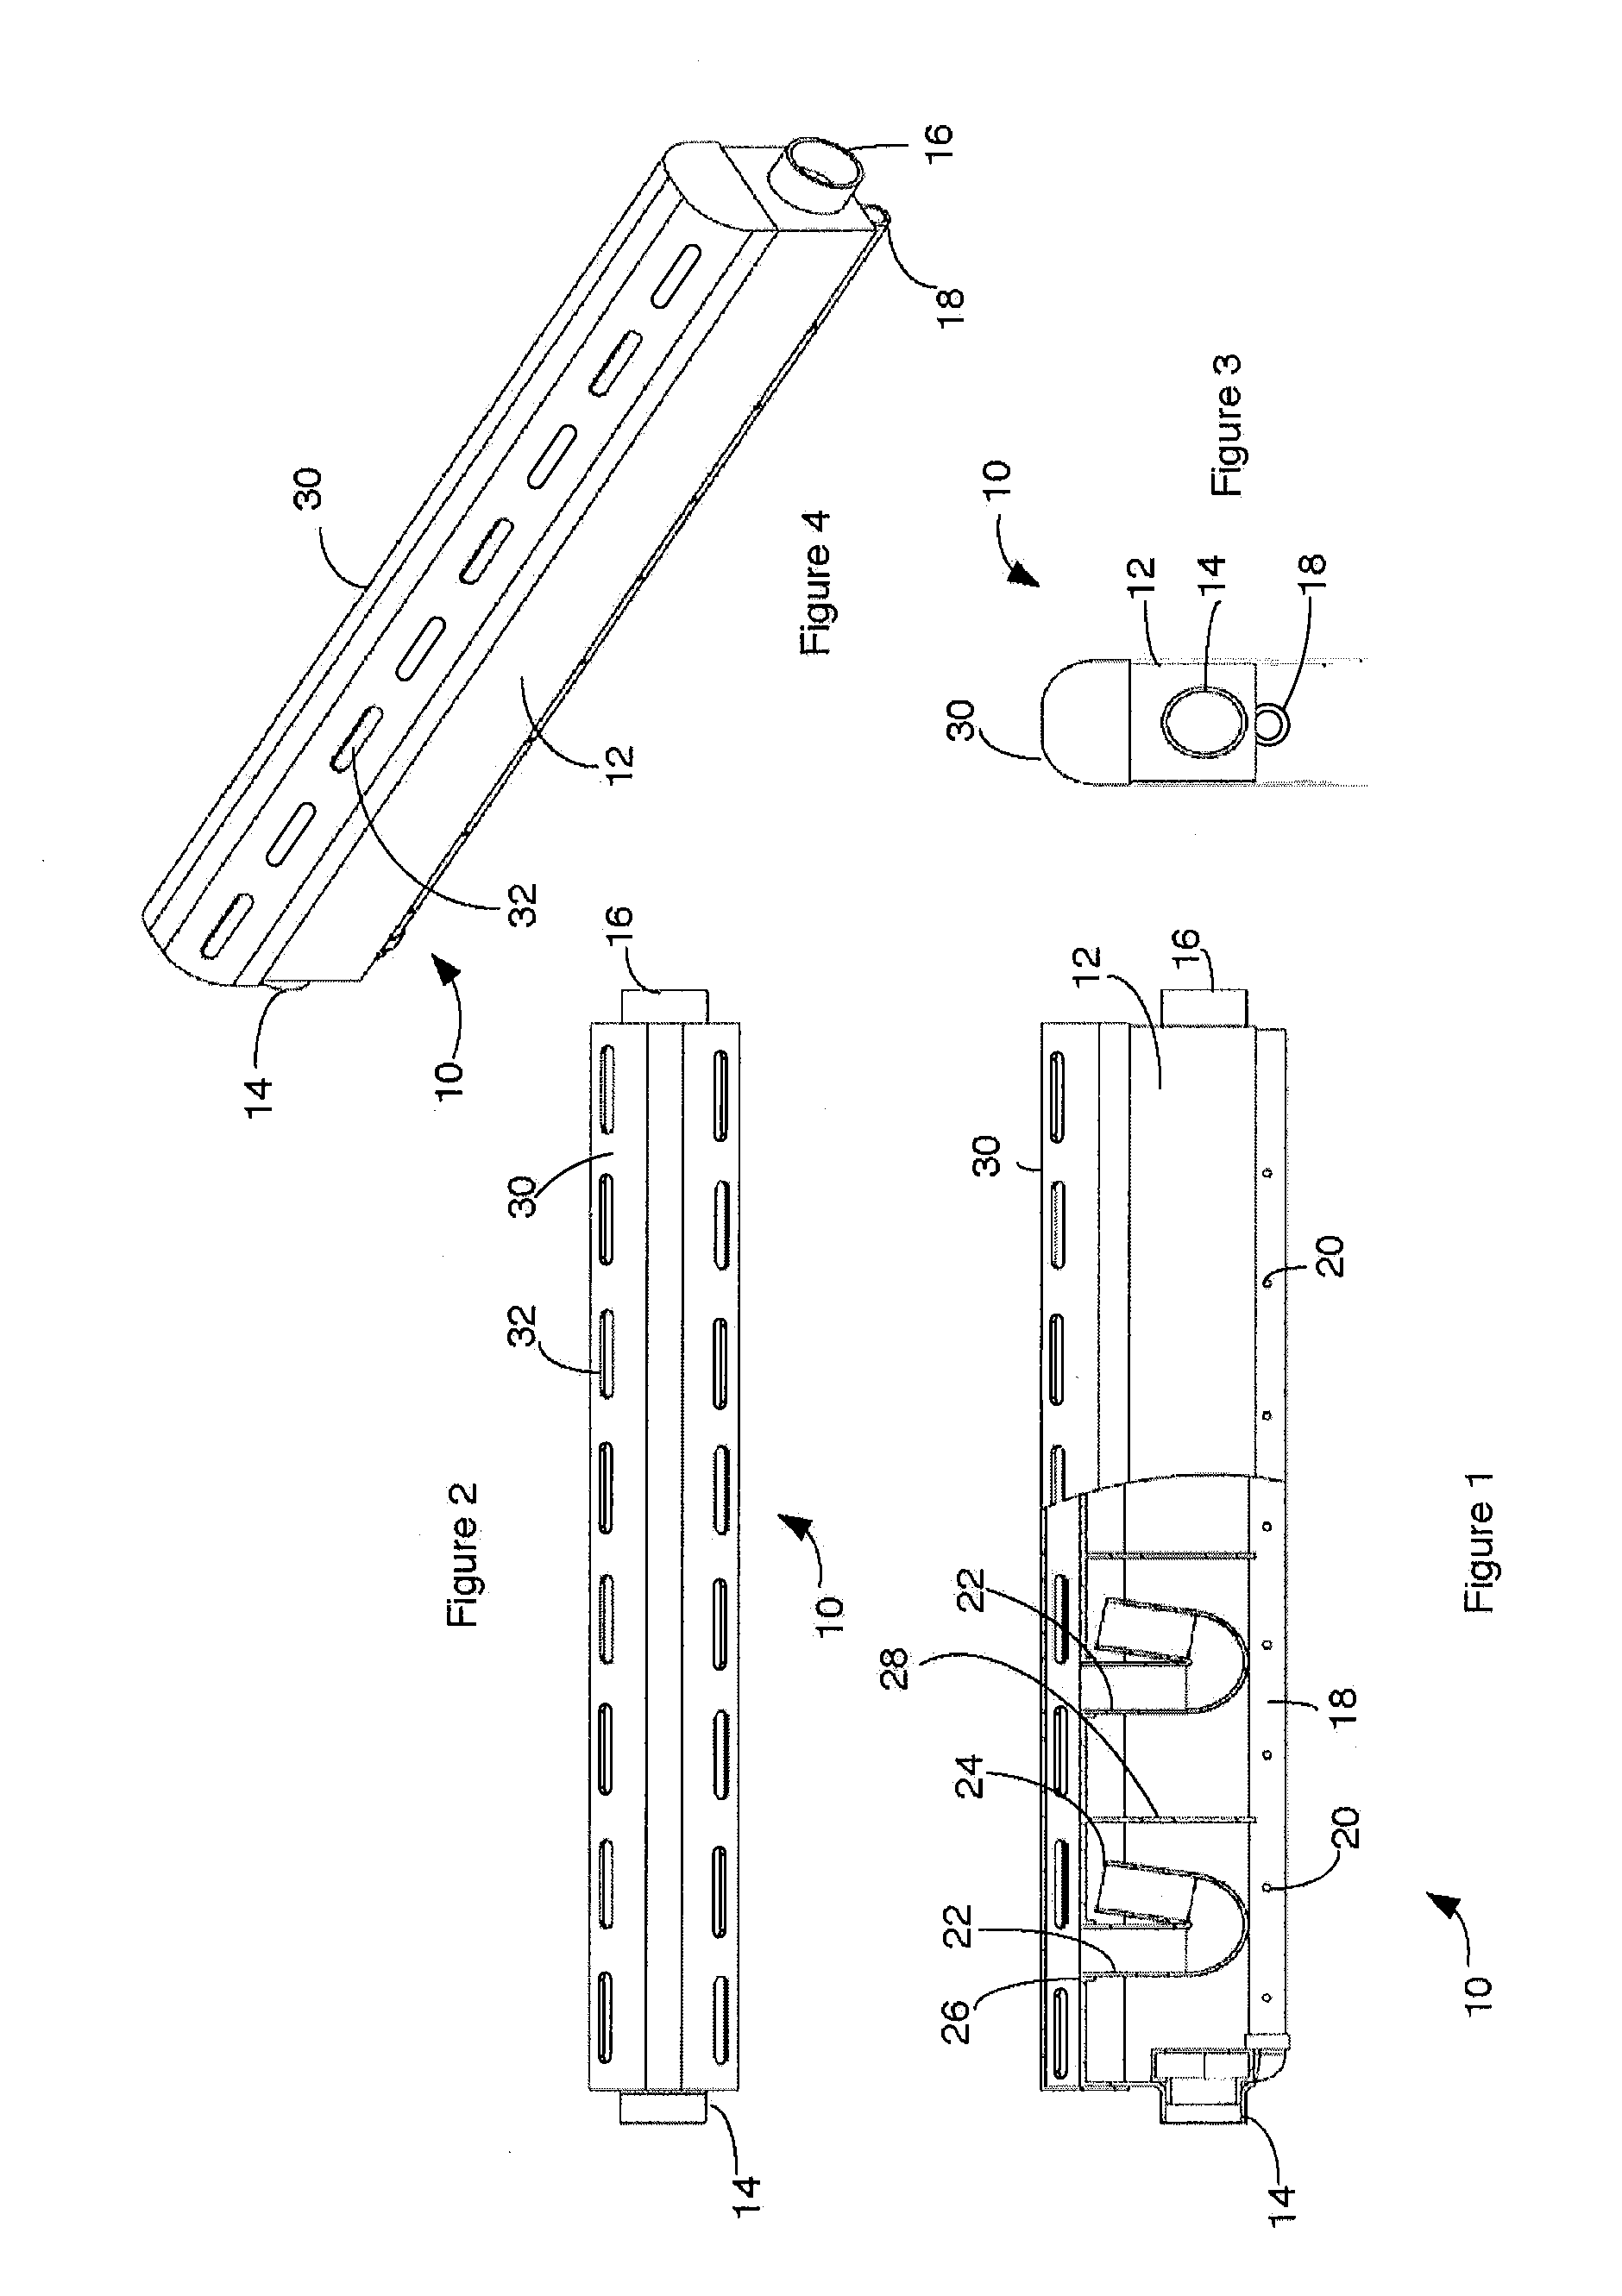 Gas sparger for an immersed membrane